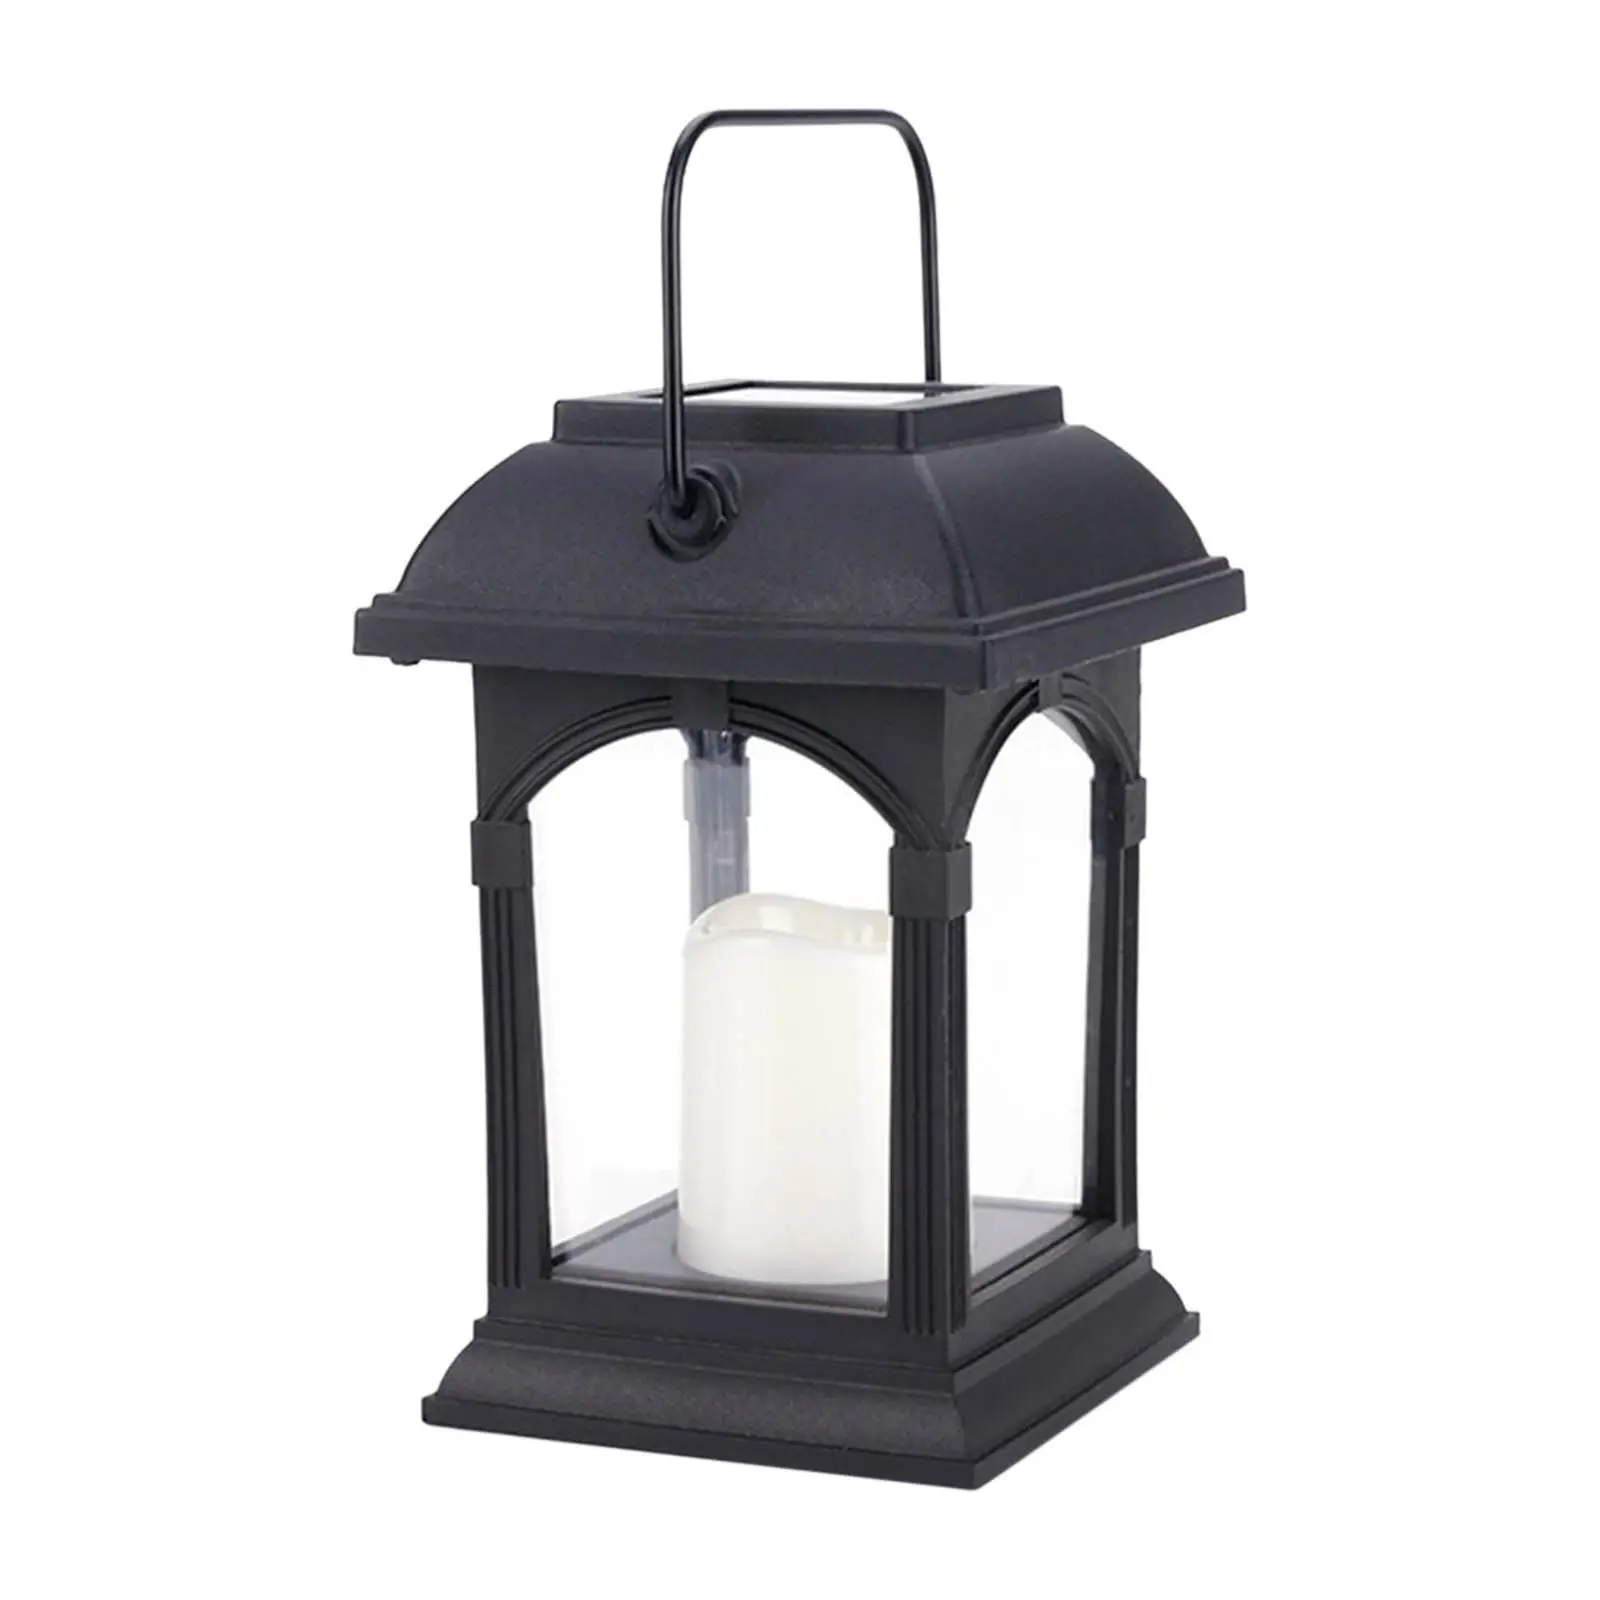 Outdoor Candle Lantern Garden Decorative Light Flickering Flame Lanterns for Table